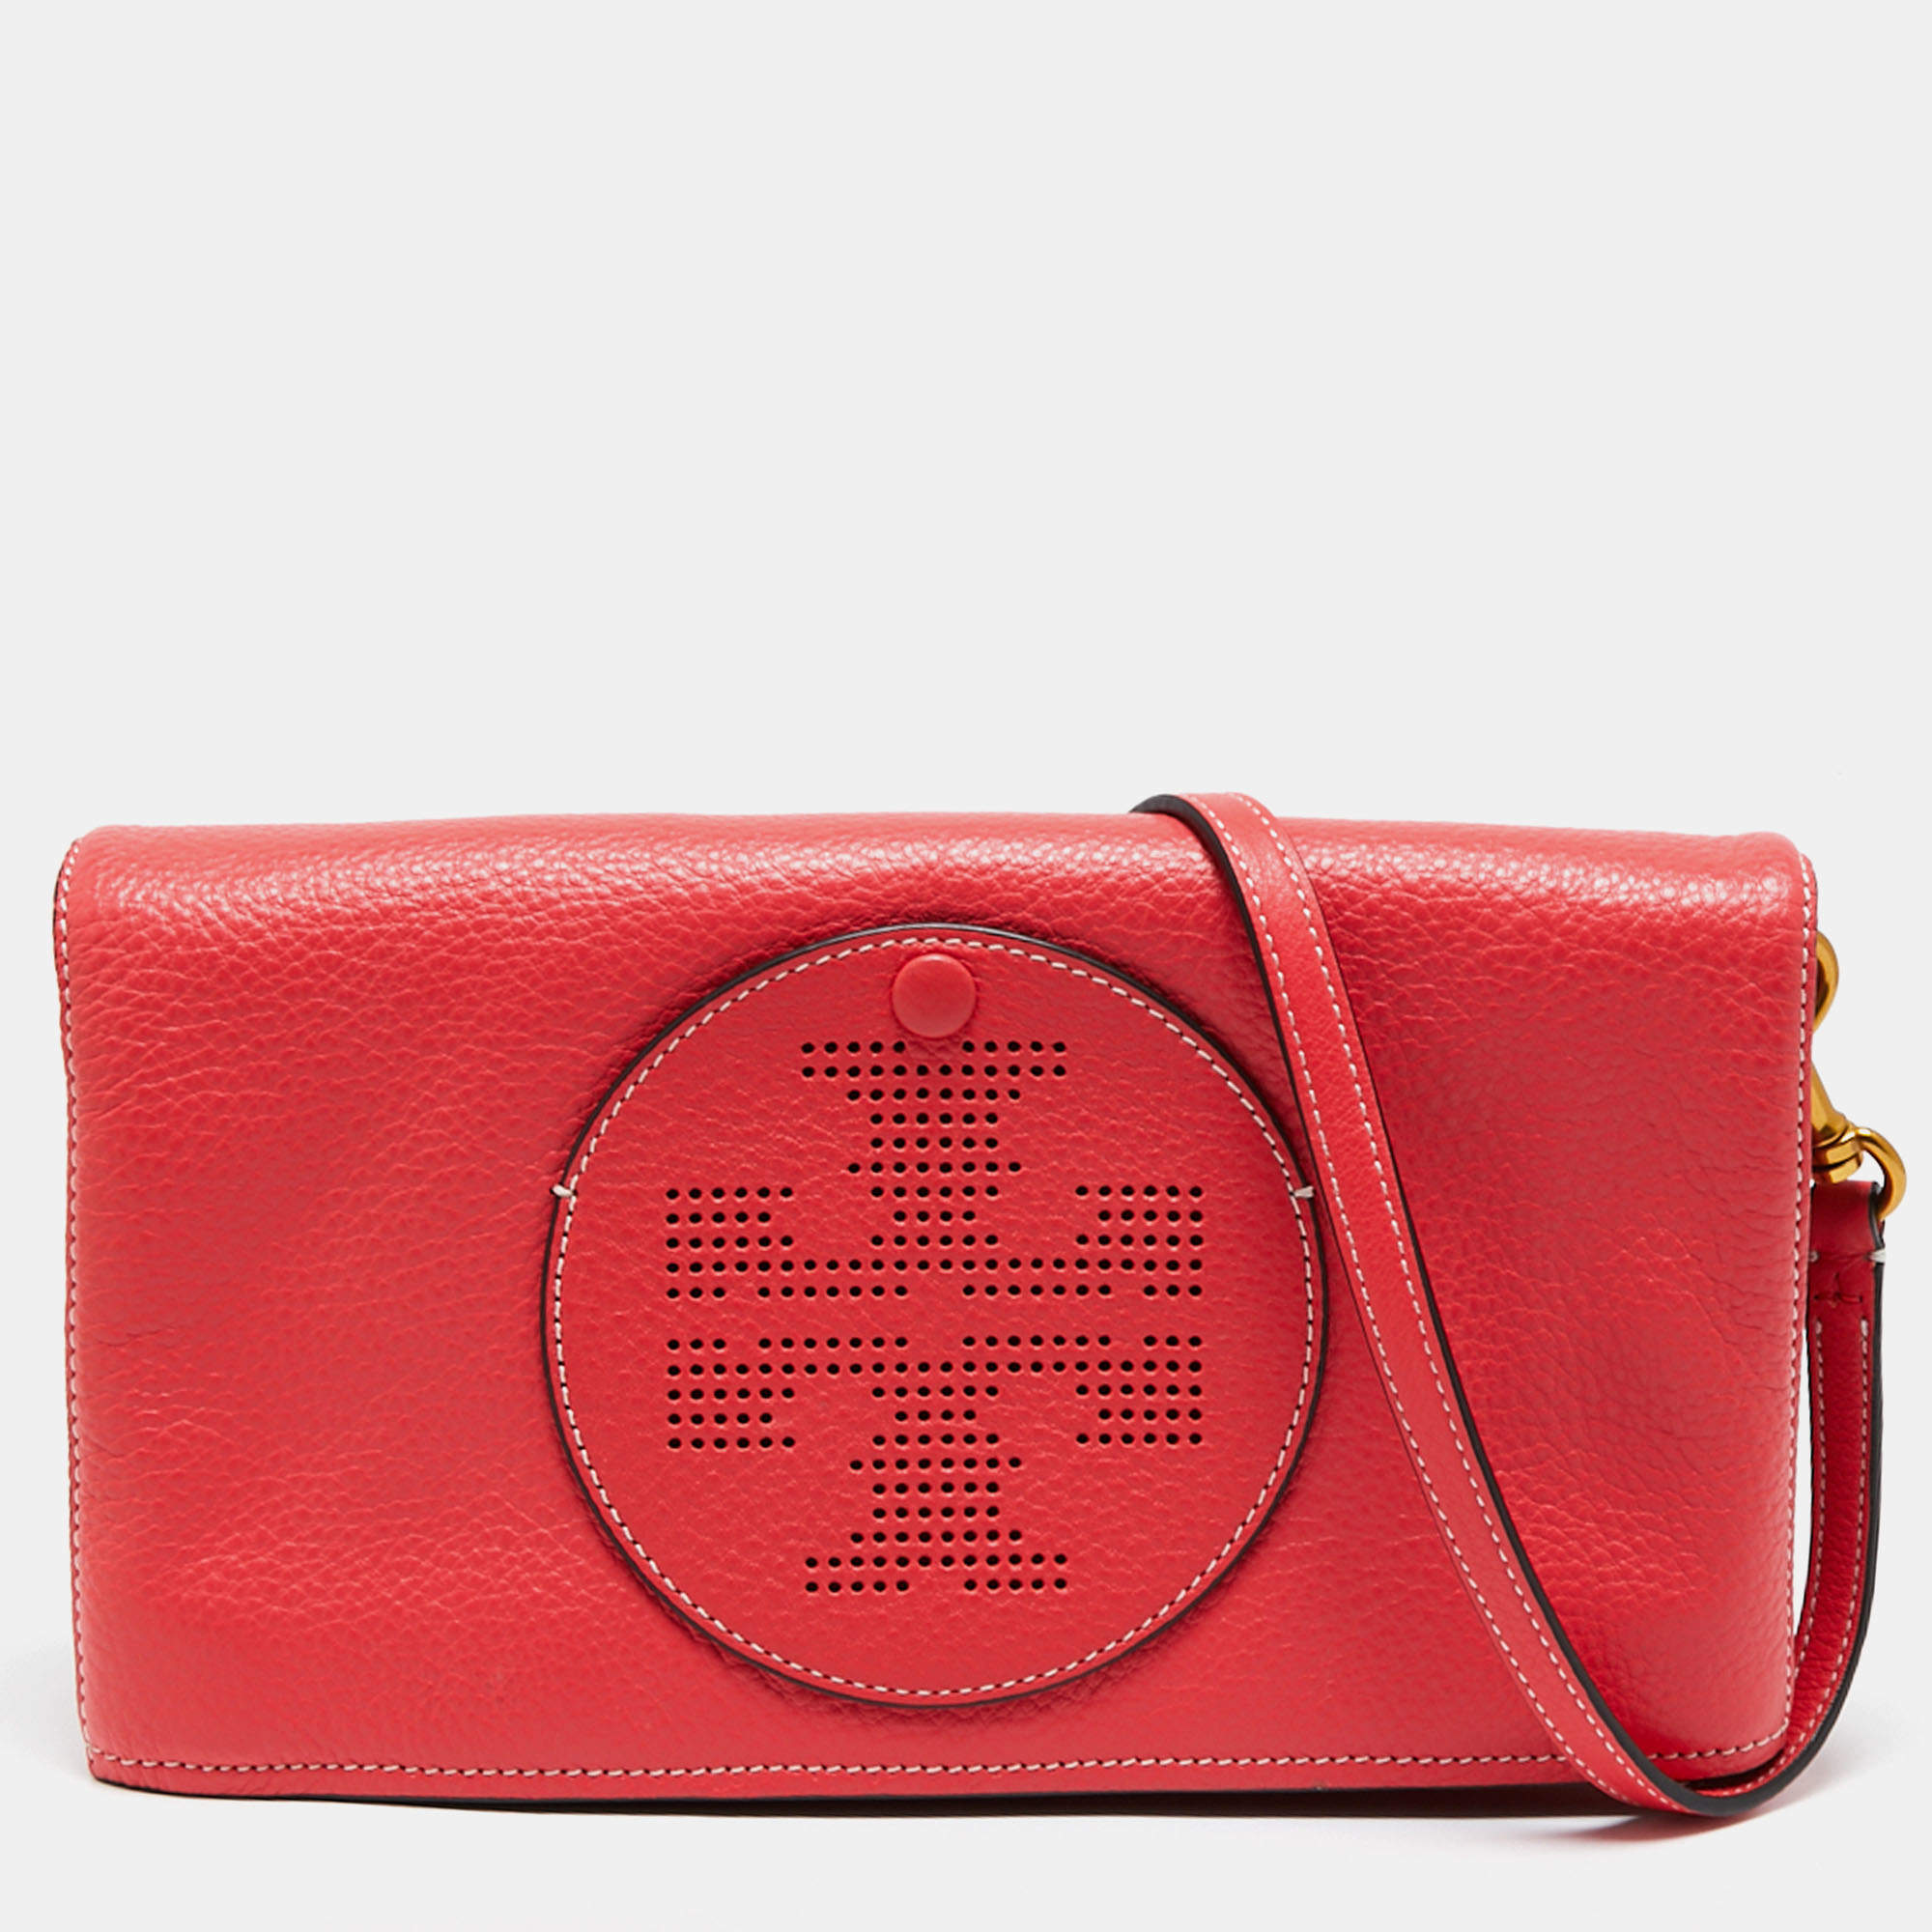 Tory Burch Red Leather Perforated Logo Fold Over Crossbody Bag Tory Burch |  TLC